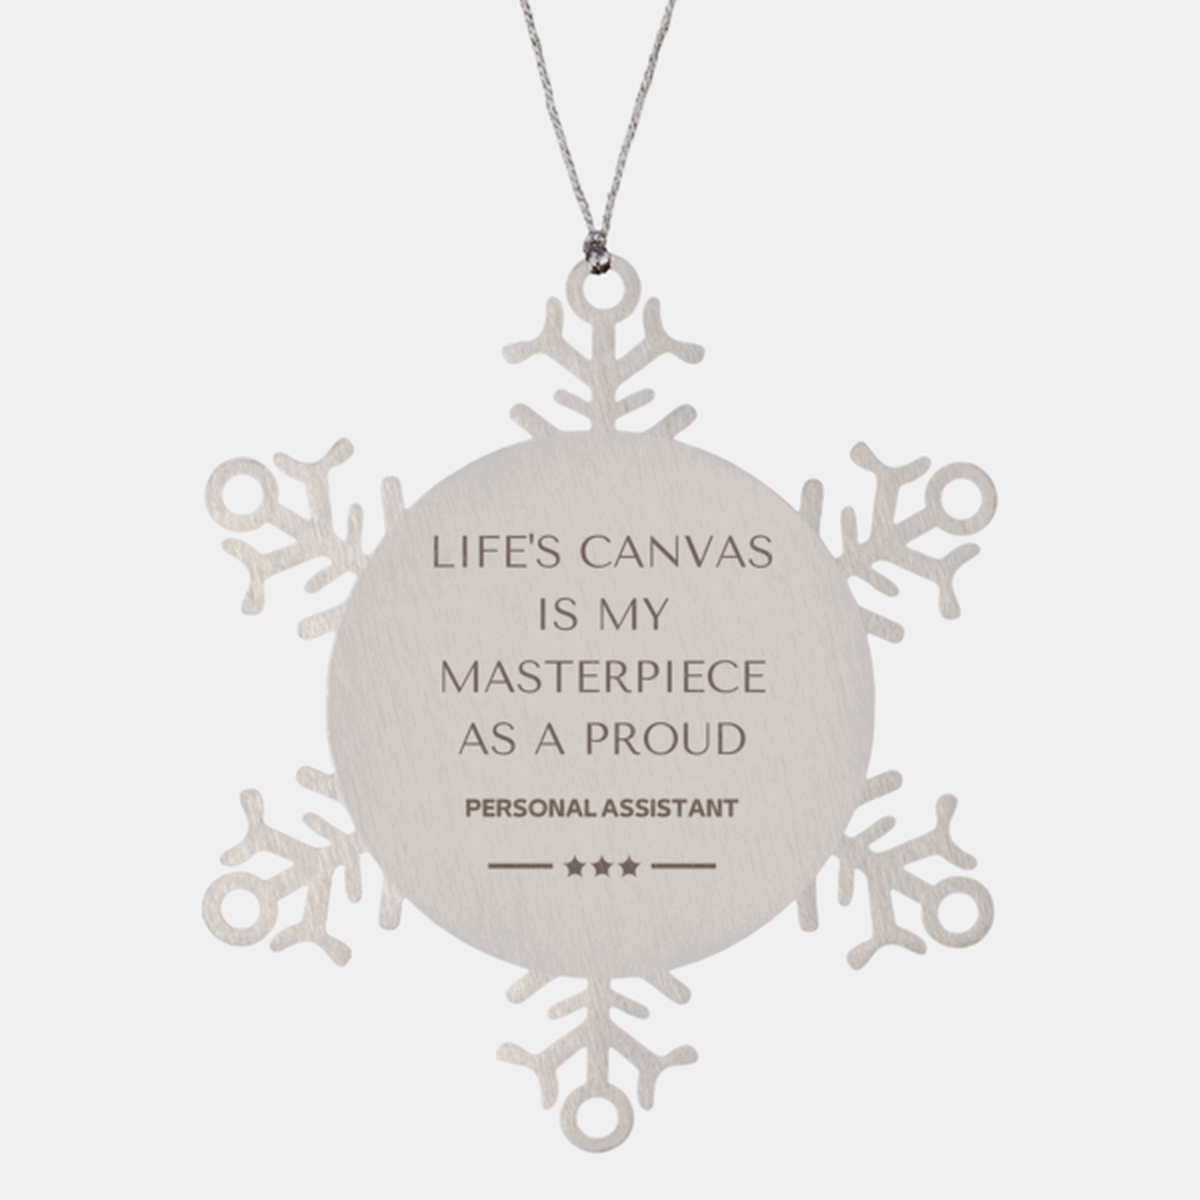 Proud Personal Assistant Gifts, Life's canvas is my masterpiece, Epic Birthday Christmas Unique Snowflake Ornament For Personal Assistant, Coworkers, Men, Women, Friends